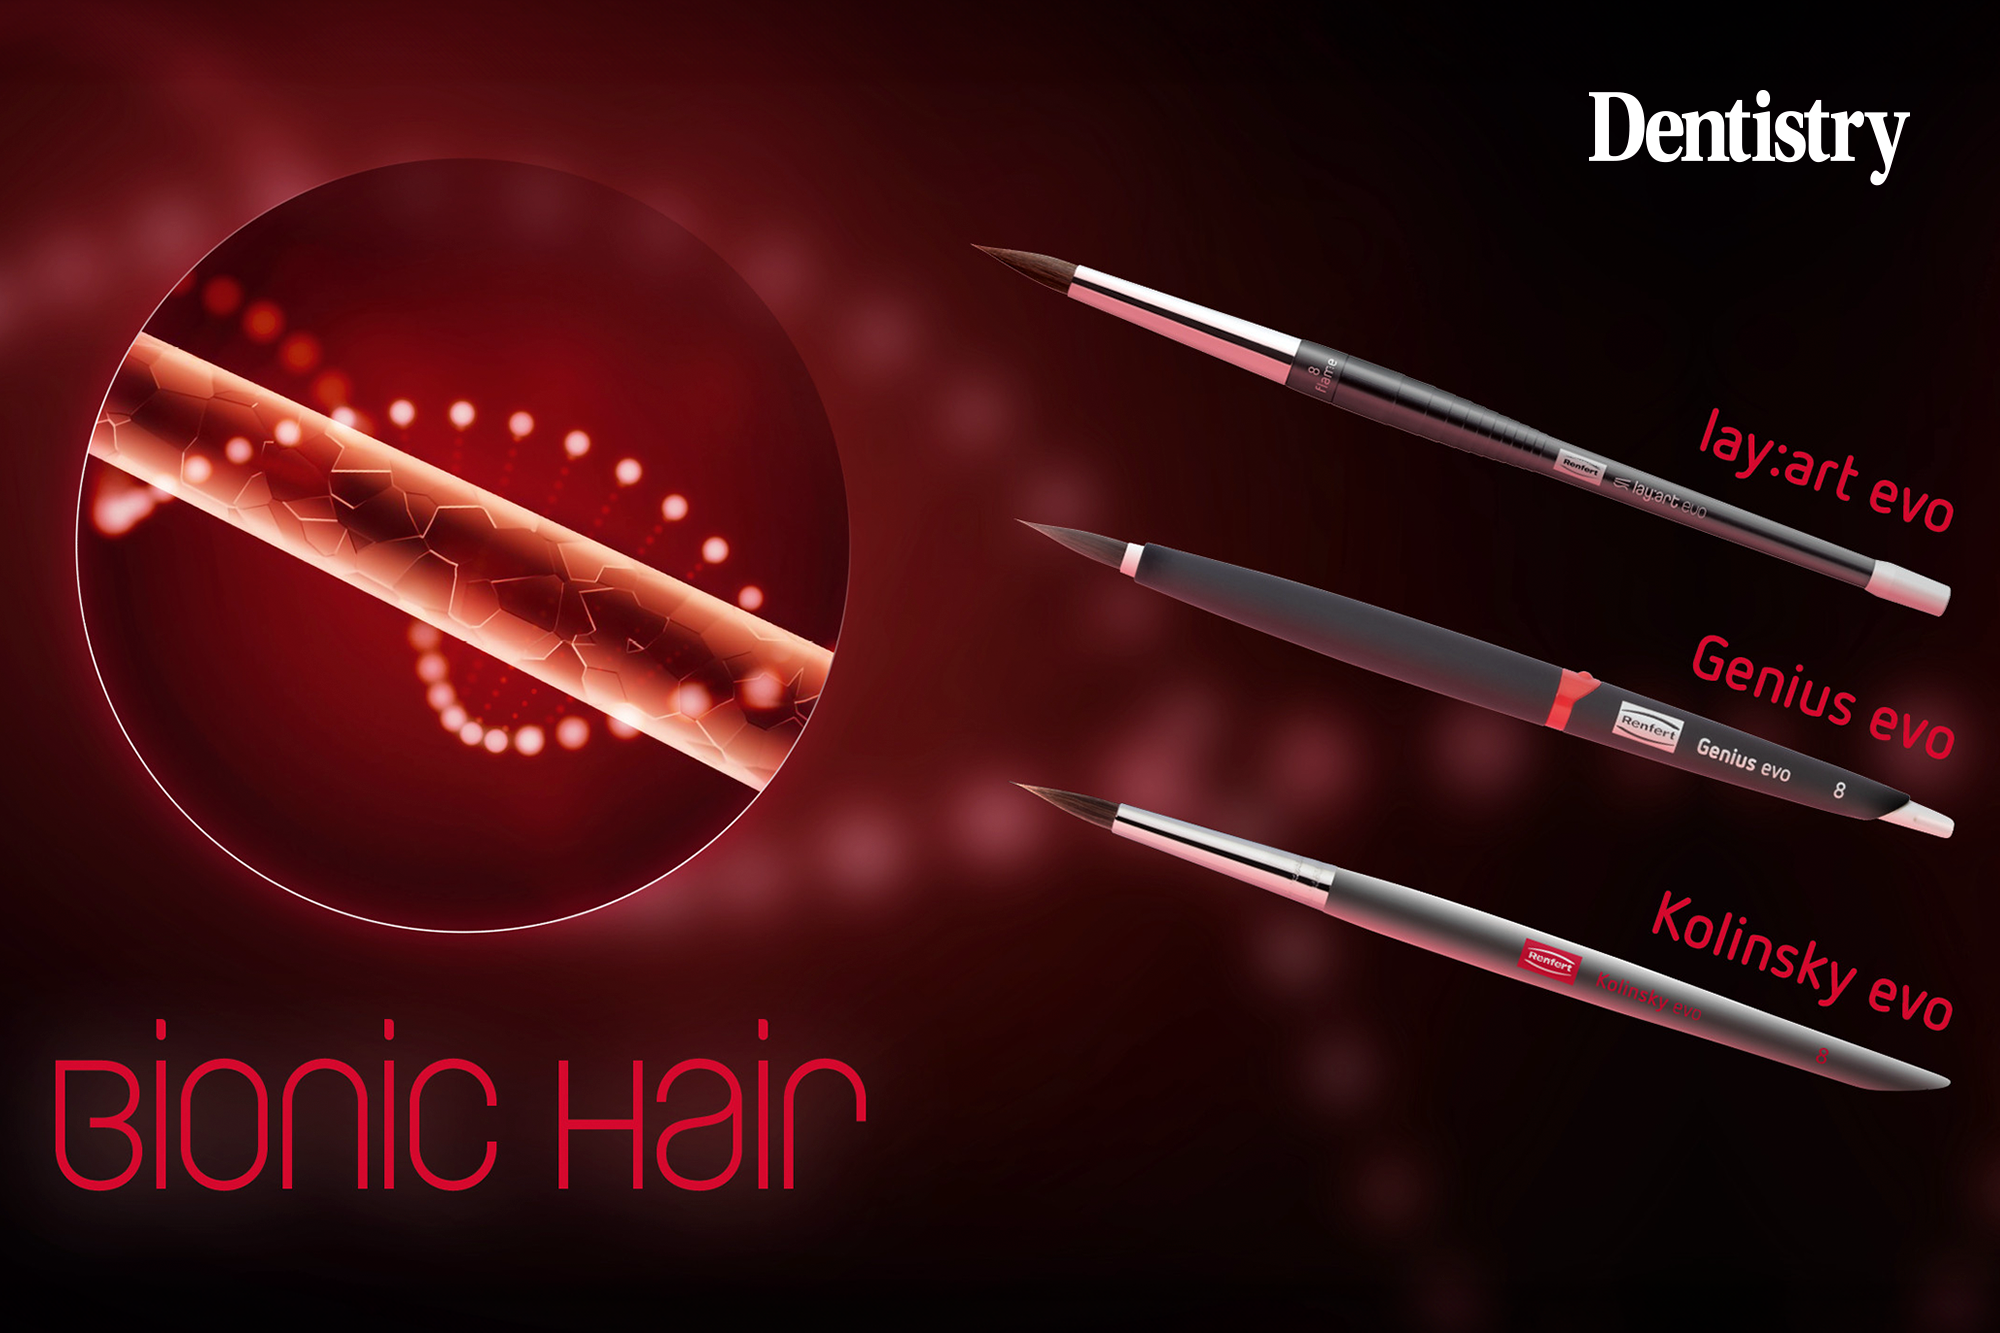 Setting new standards with bionic hair brushes